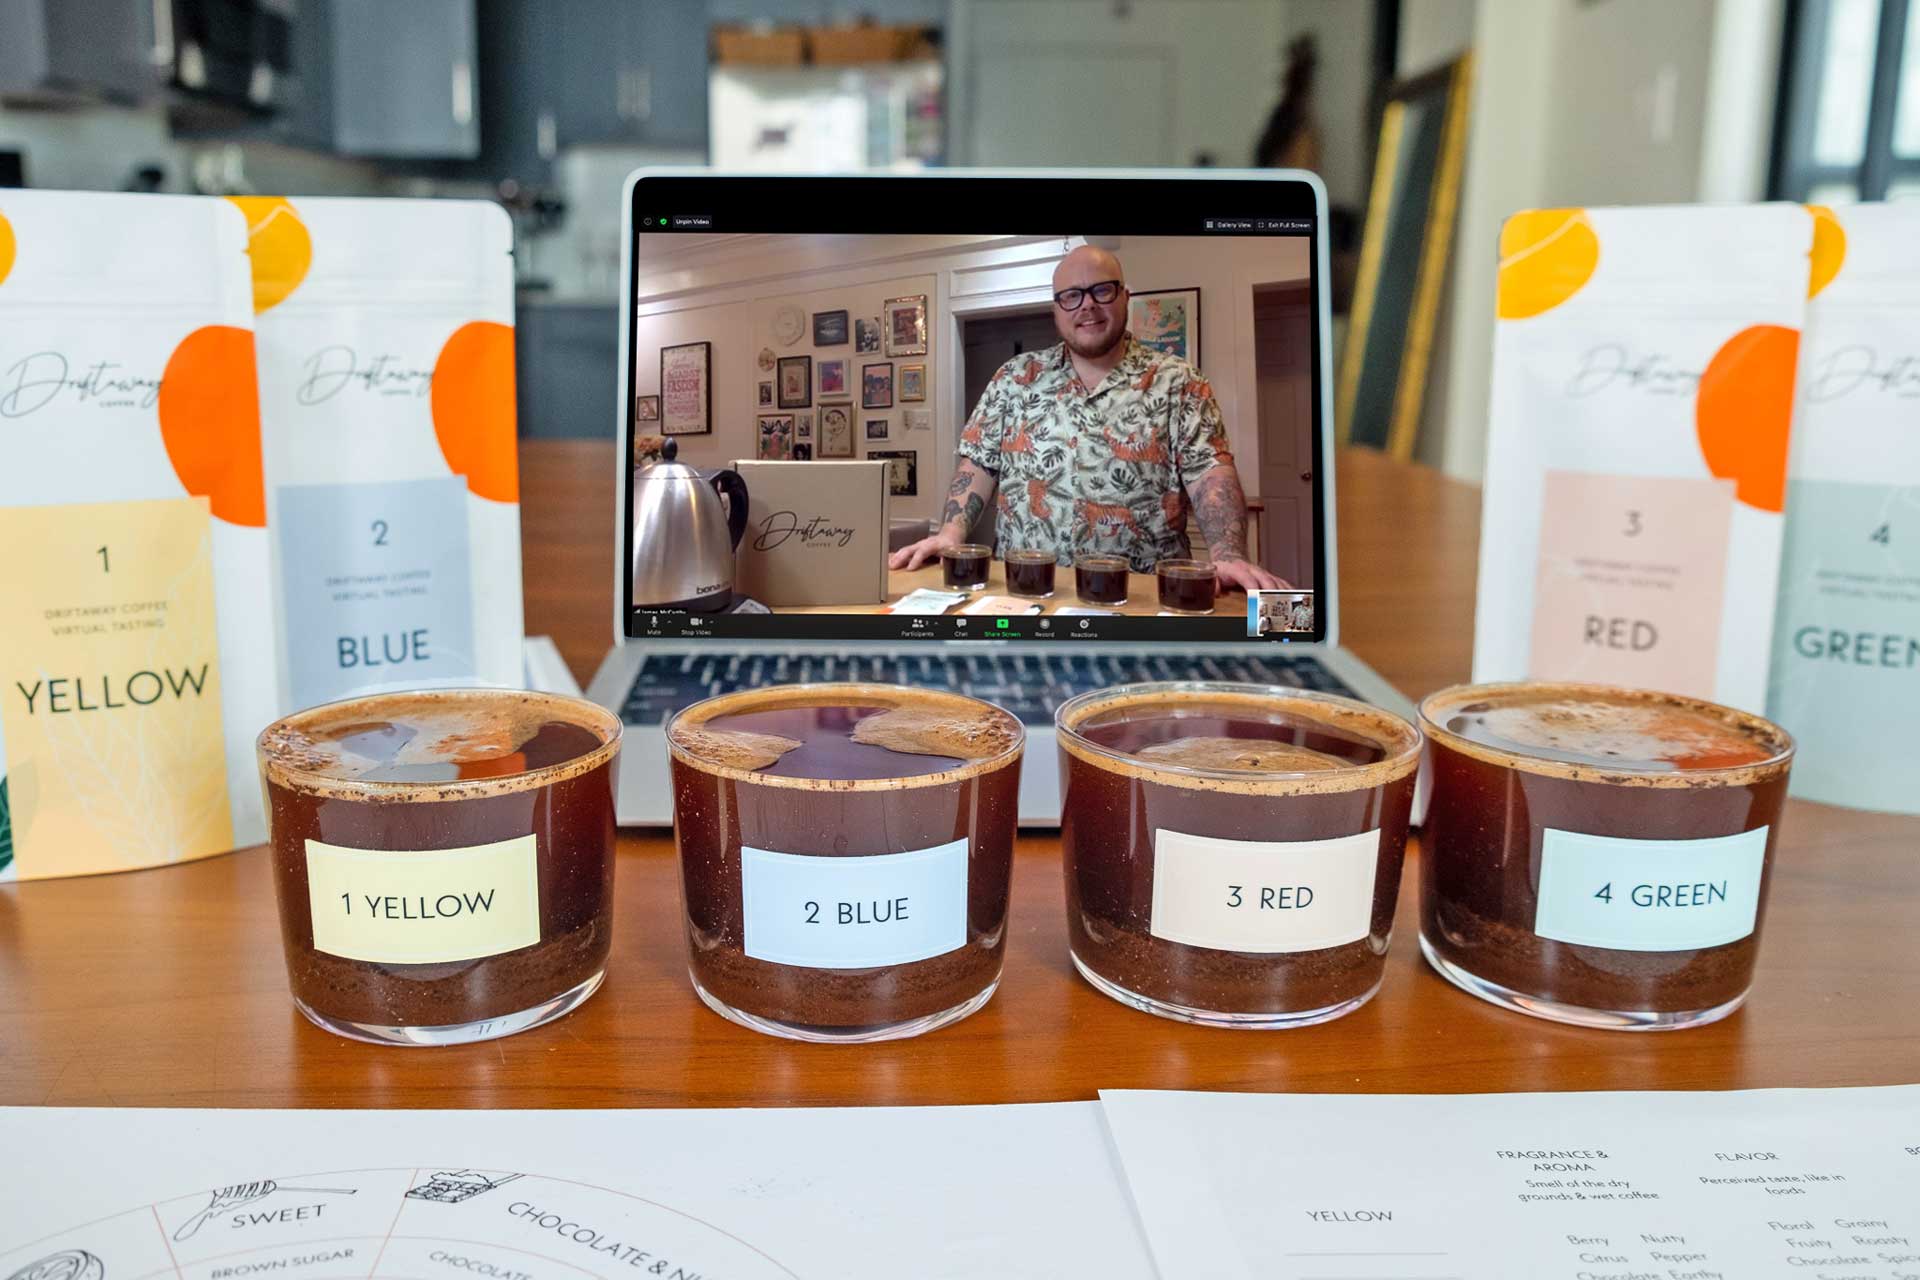 Four samples of coffee alongside a laptop computer